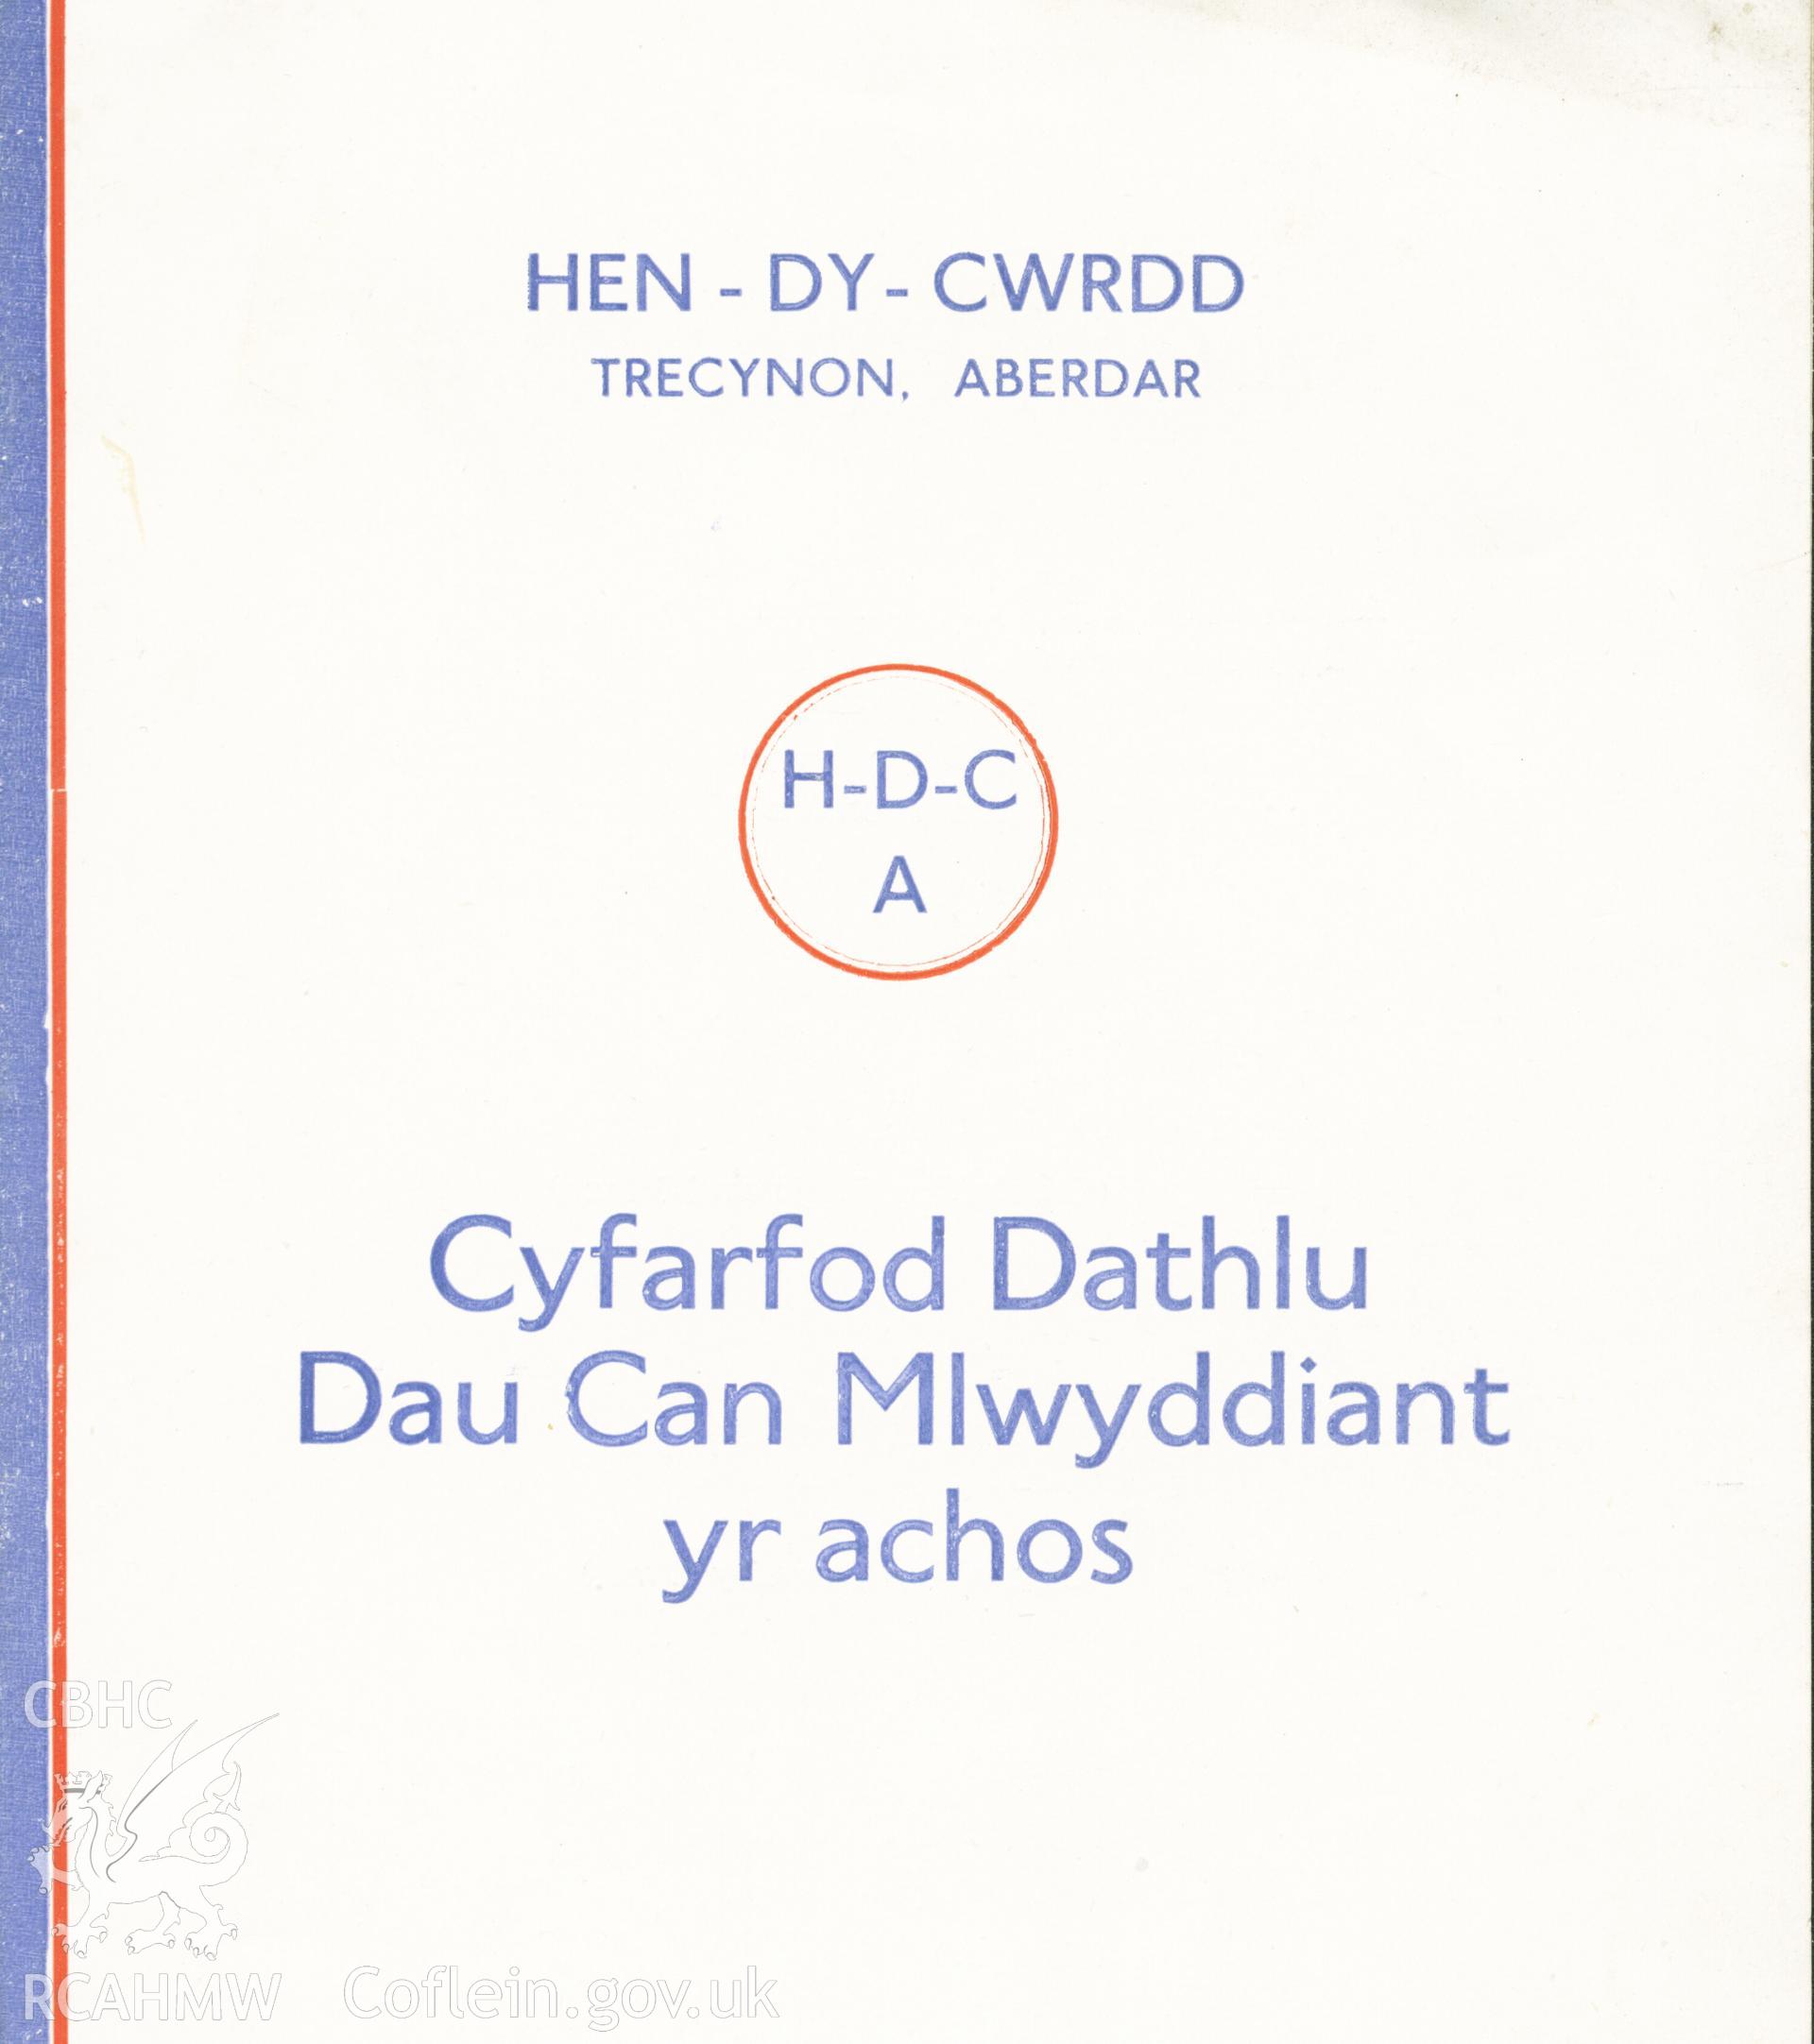 Cover of programme of events to celebrate the two hundredth anniversary of Hen-Dy-Cwrdd, Trecynon, Aberdare on 27th March 1951. Donated to the RCAHMW during the Digital Dissent Project.